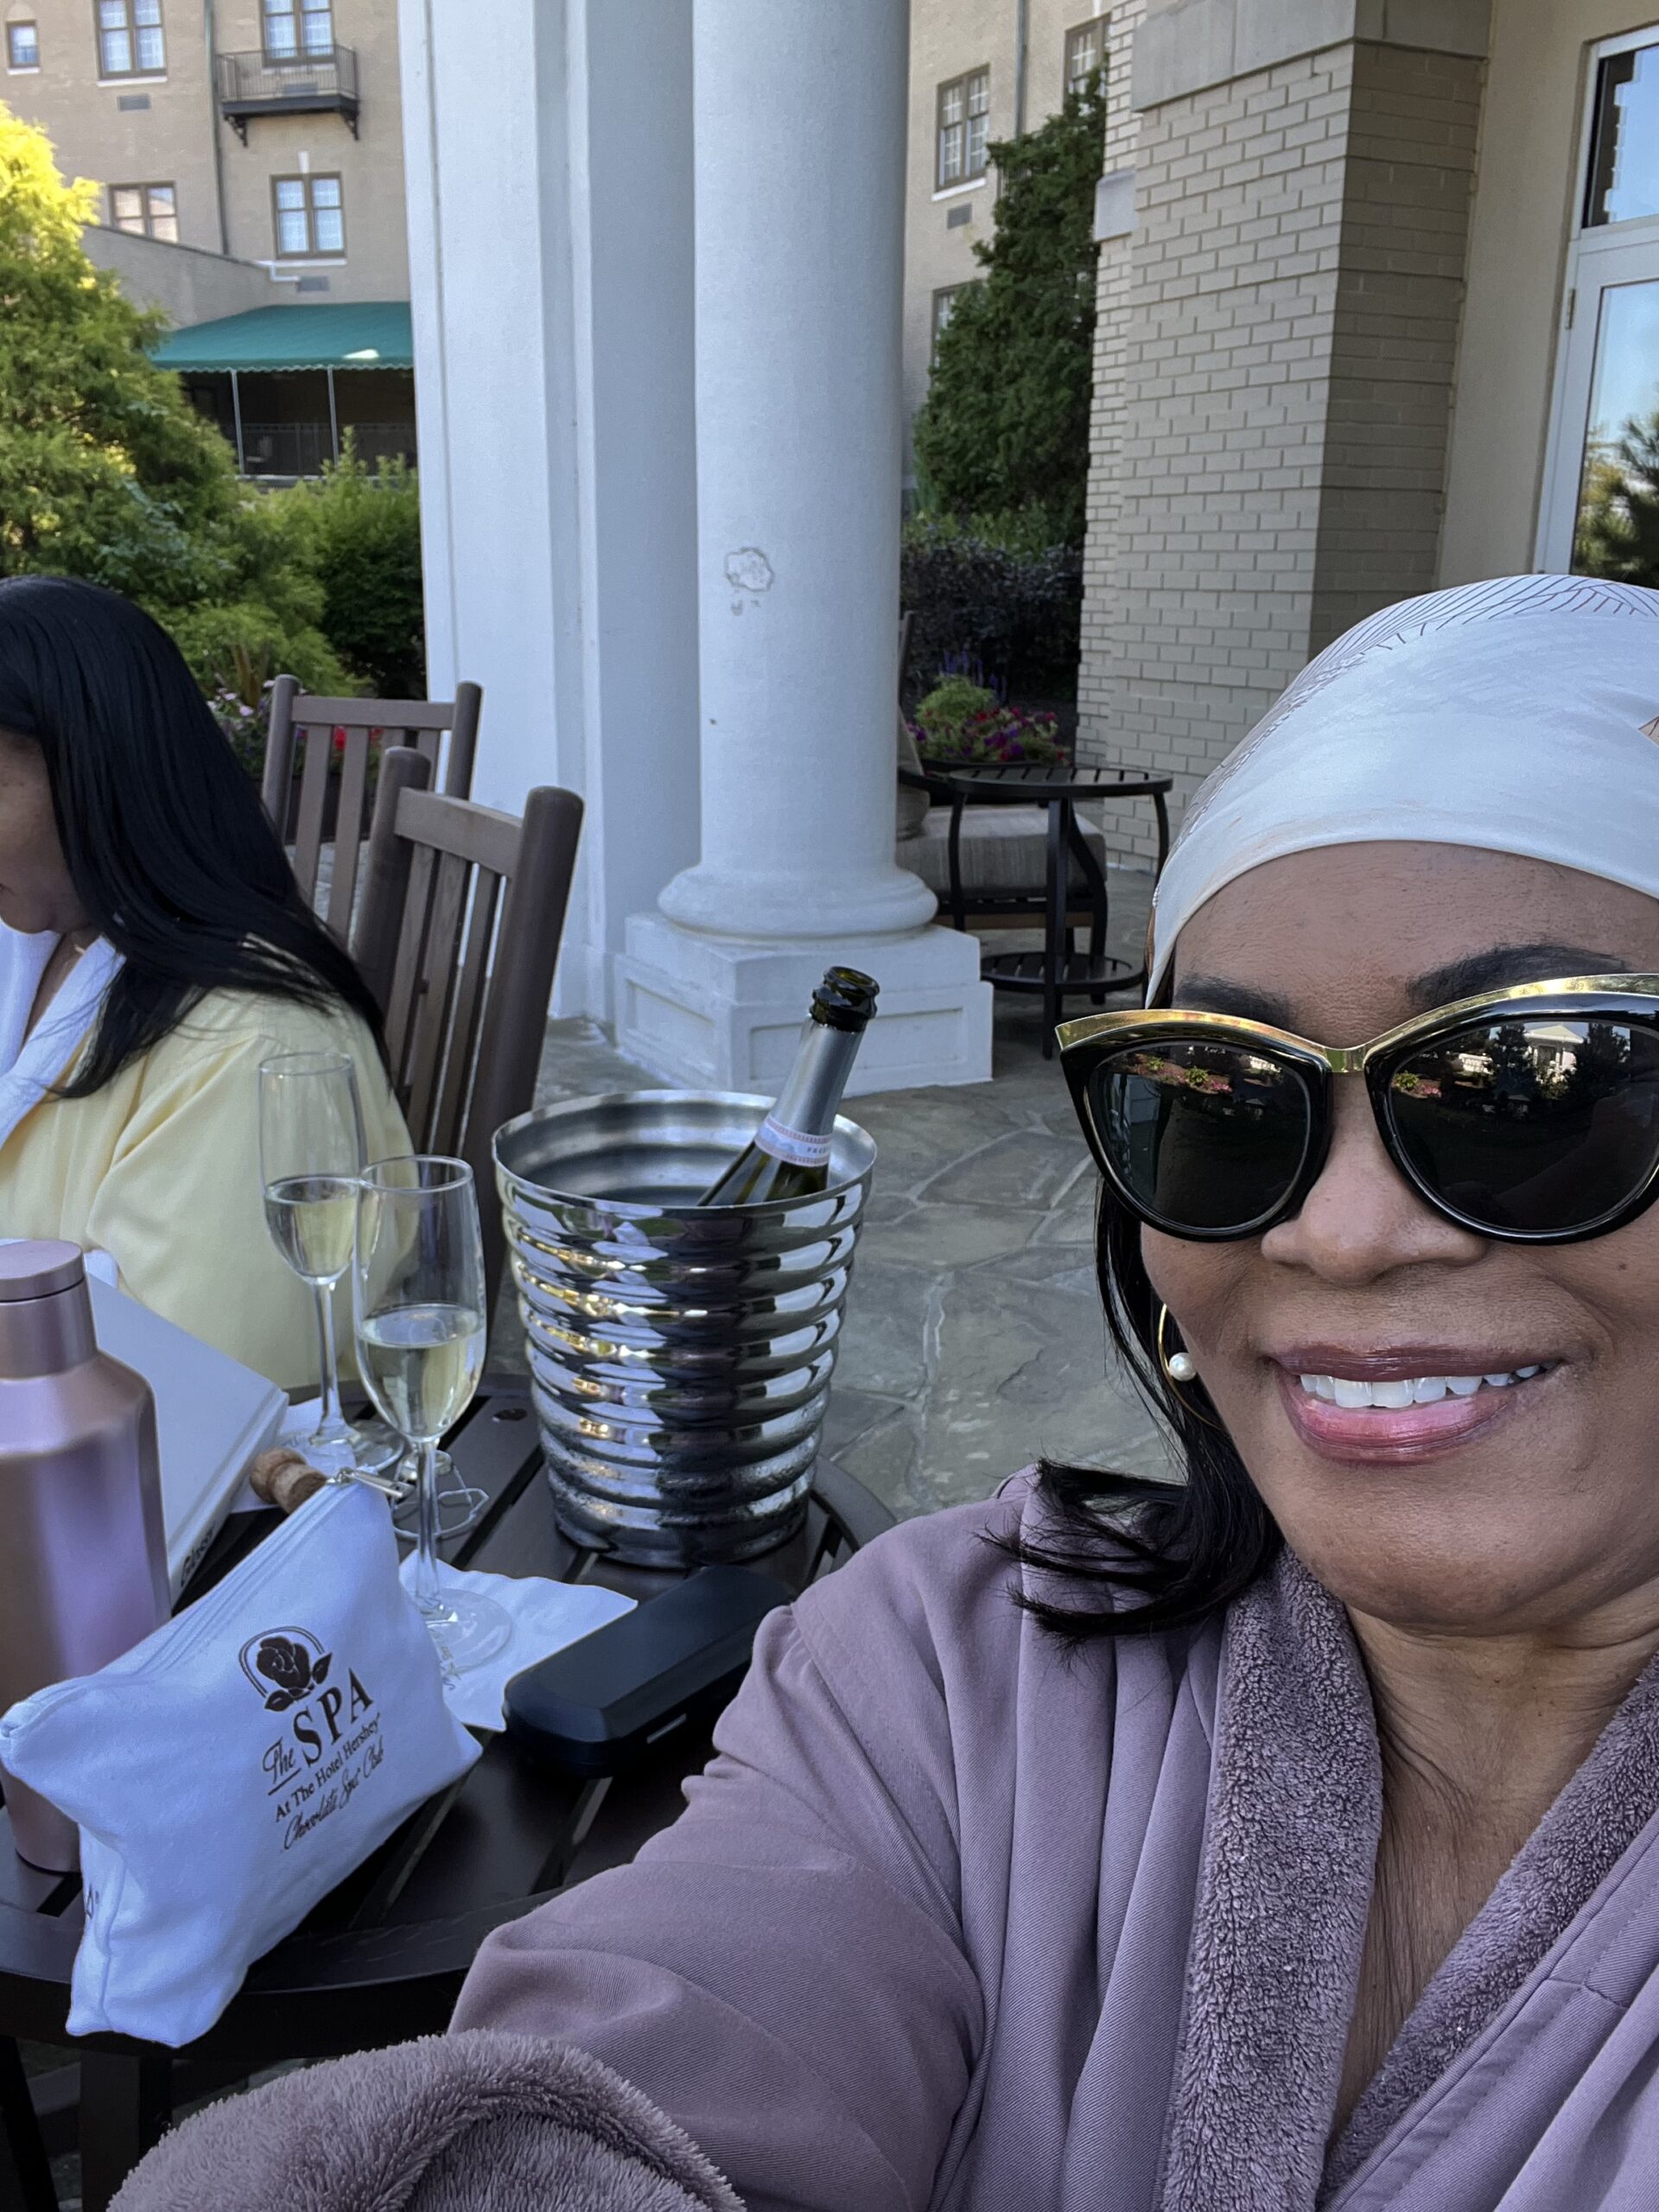 Sitting in rocking chairs after spa treatments at the Spa at the Hotel Hershey